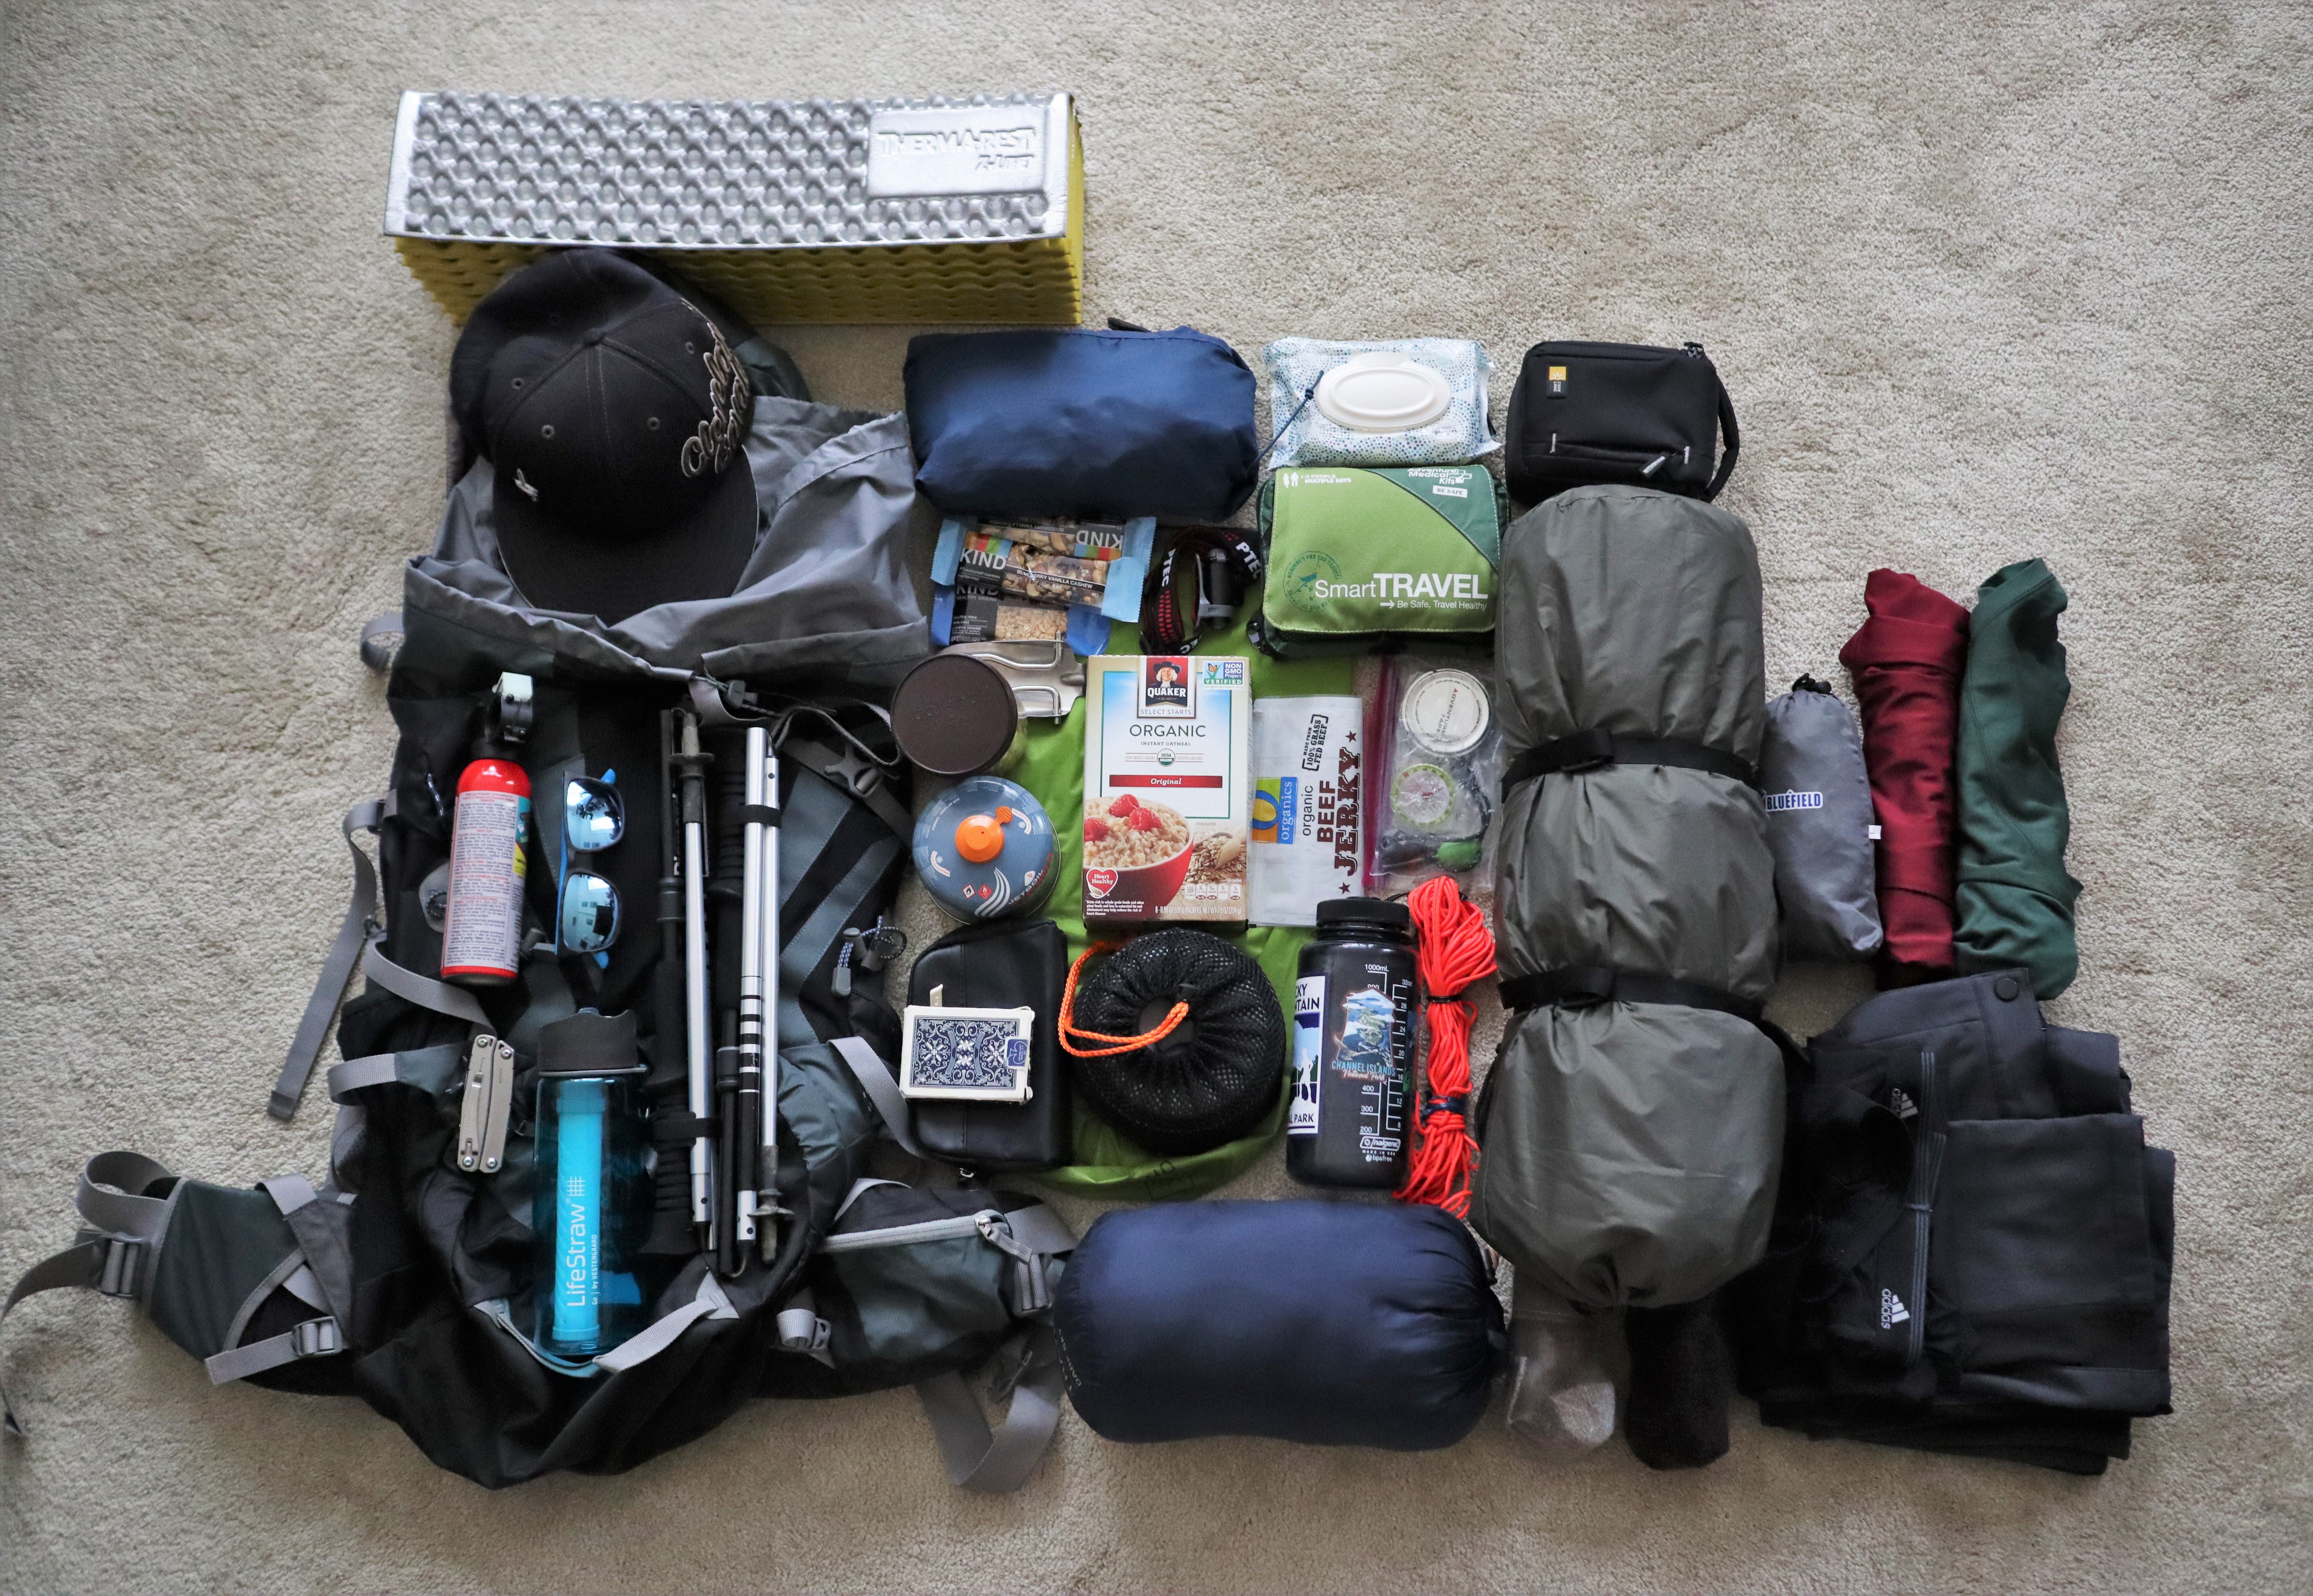 The Definitive Guide that You Never Wanted: Packing Your Backpack | by  Geoff C | Pangolins with Packs